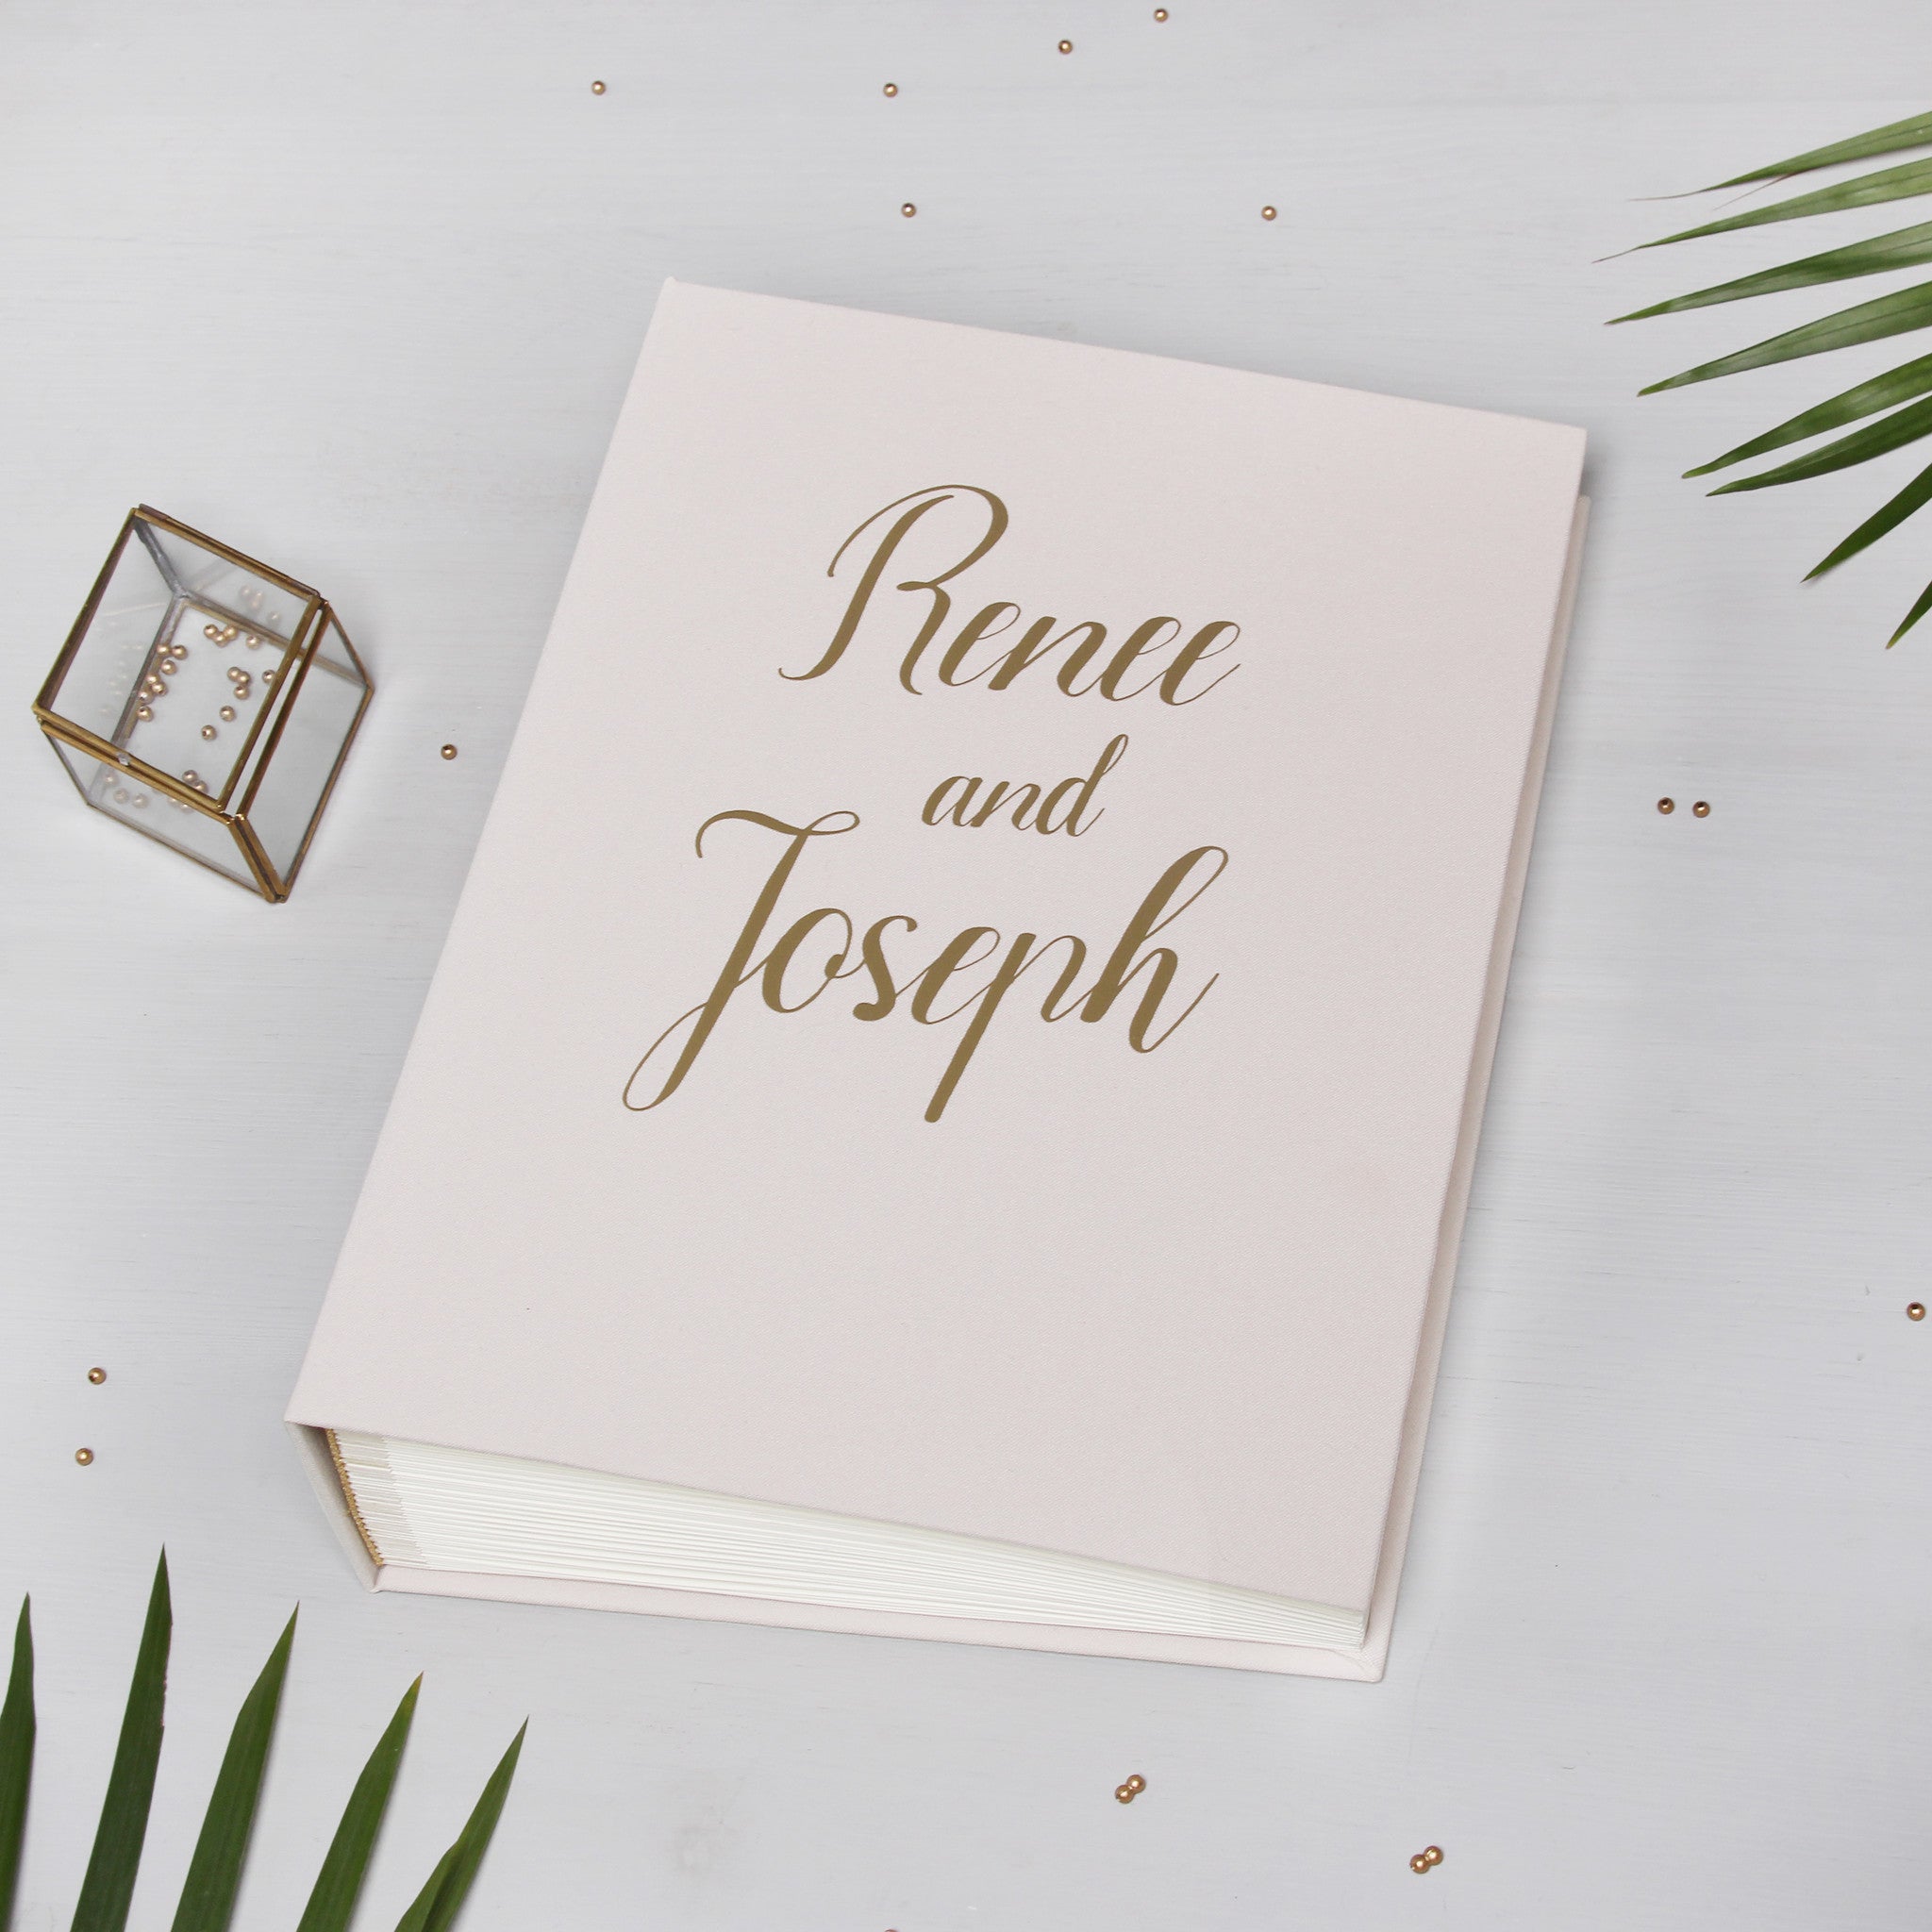 Guest Book Sign in Book Instant Album Cream with Gold Foil Lettering, Birthday Album by Liumy - Liumy 